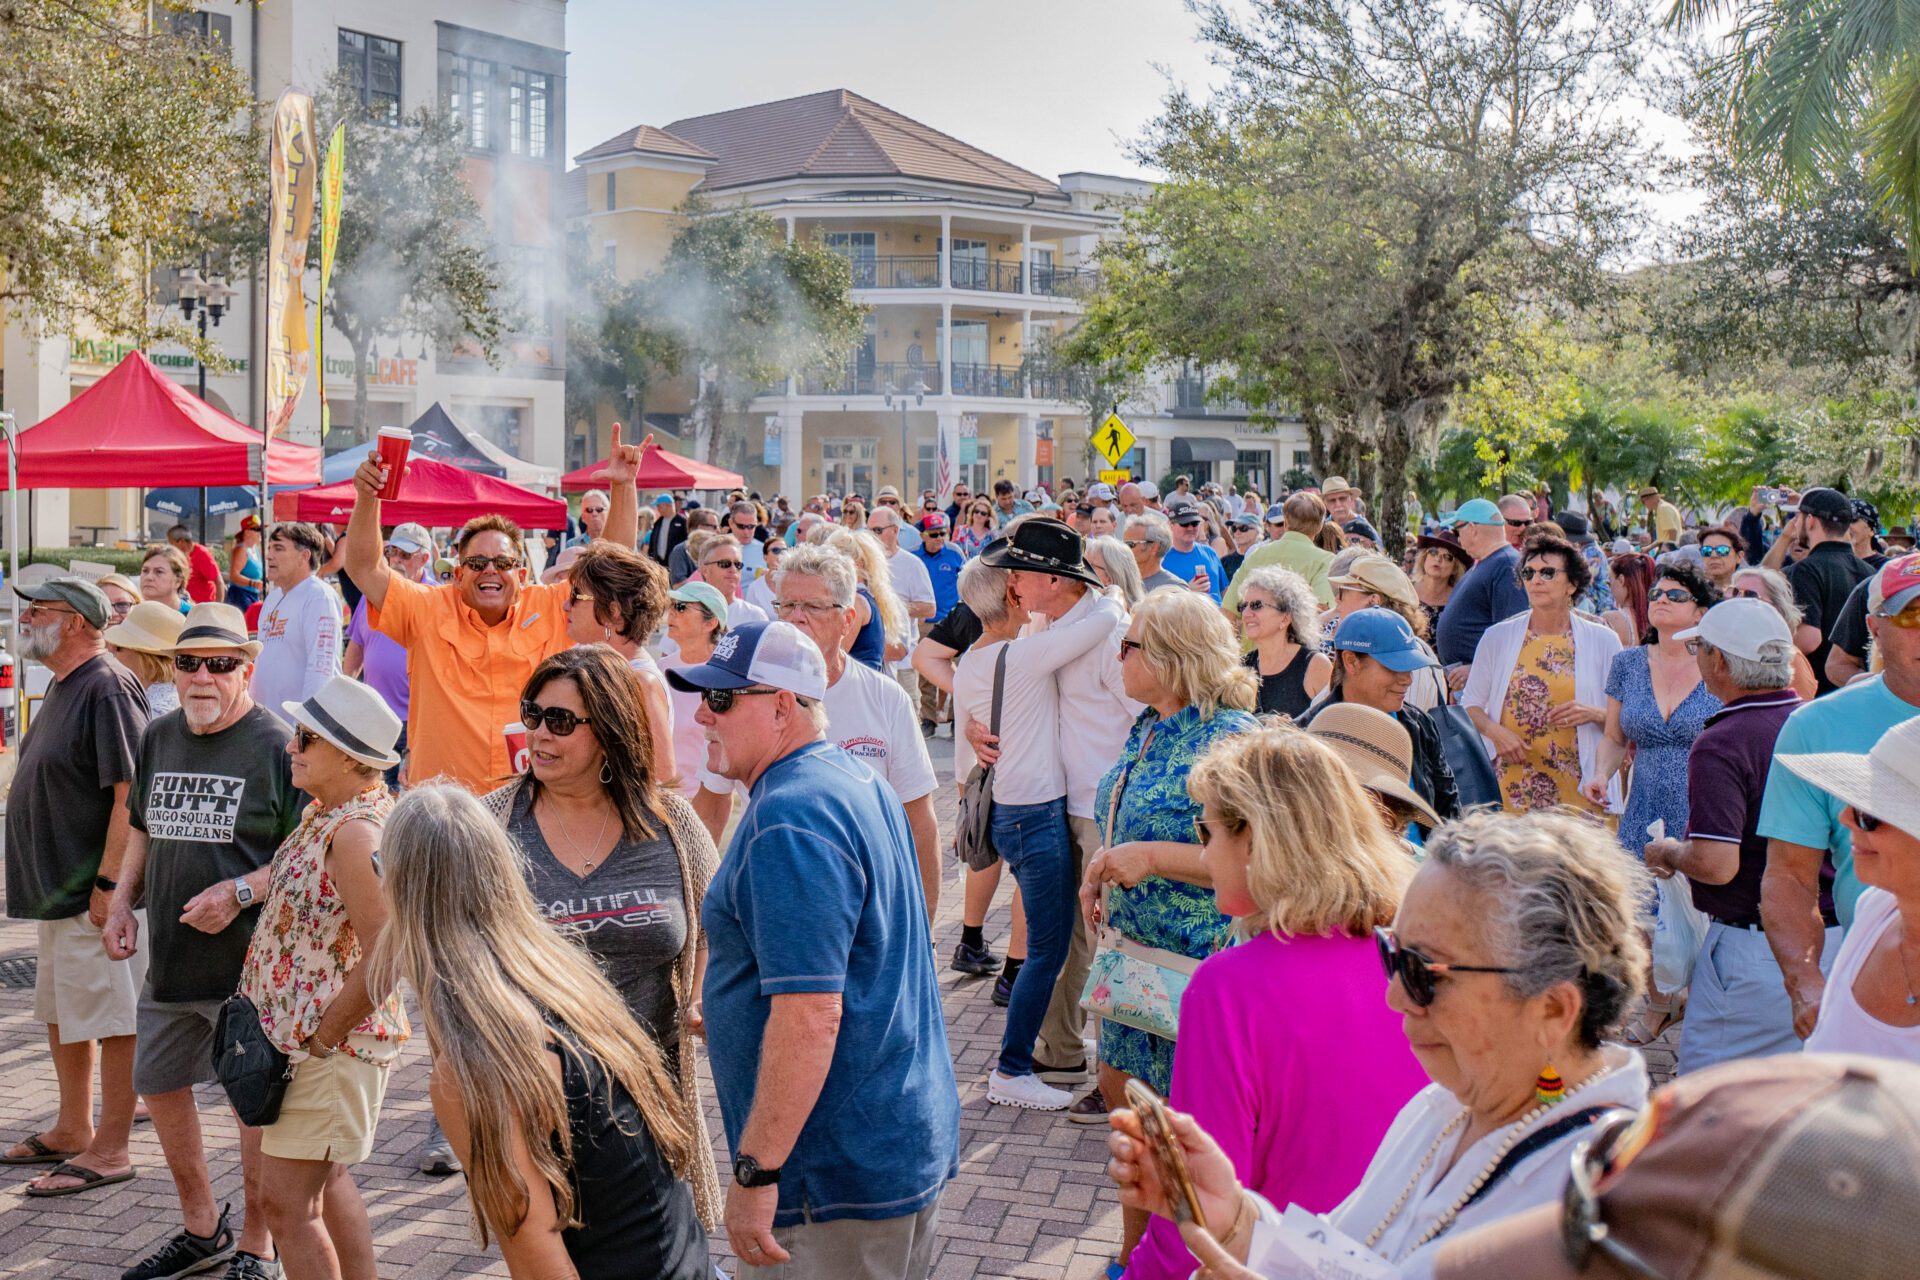 2023 Blues, Brews & BBQ Festival crowd in the Ave Maria Town Center